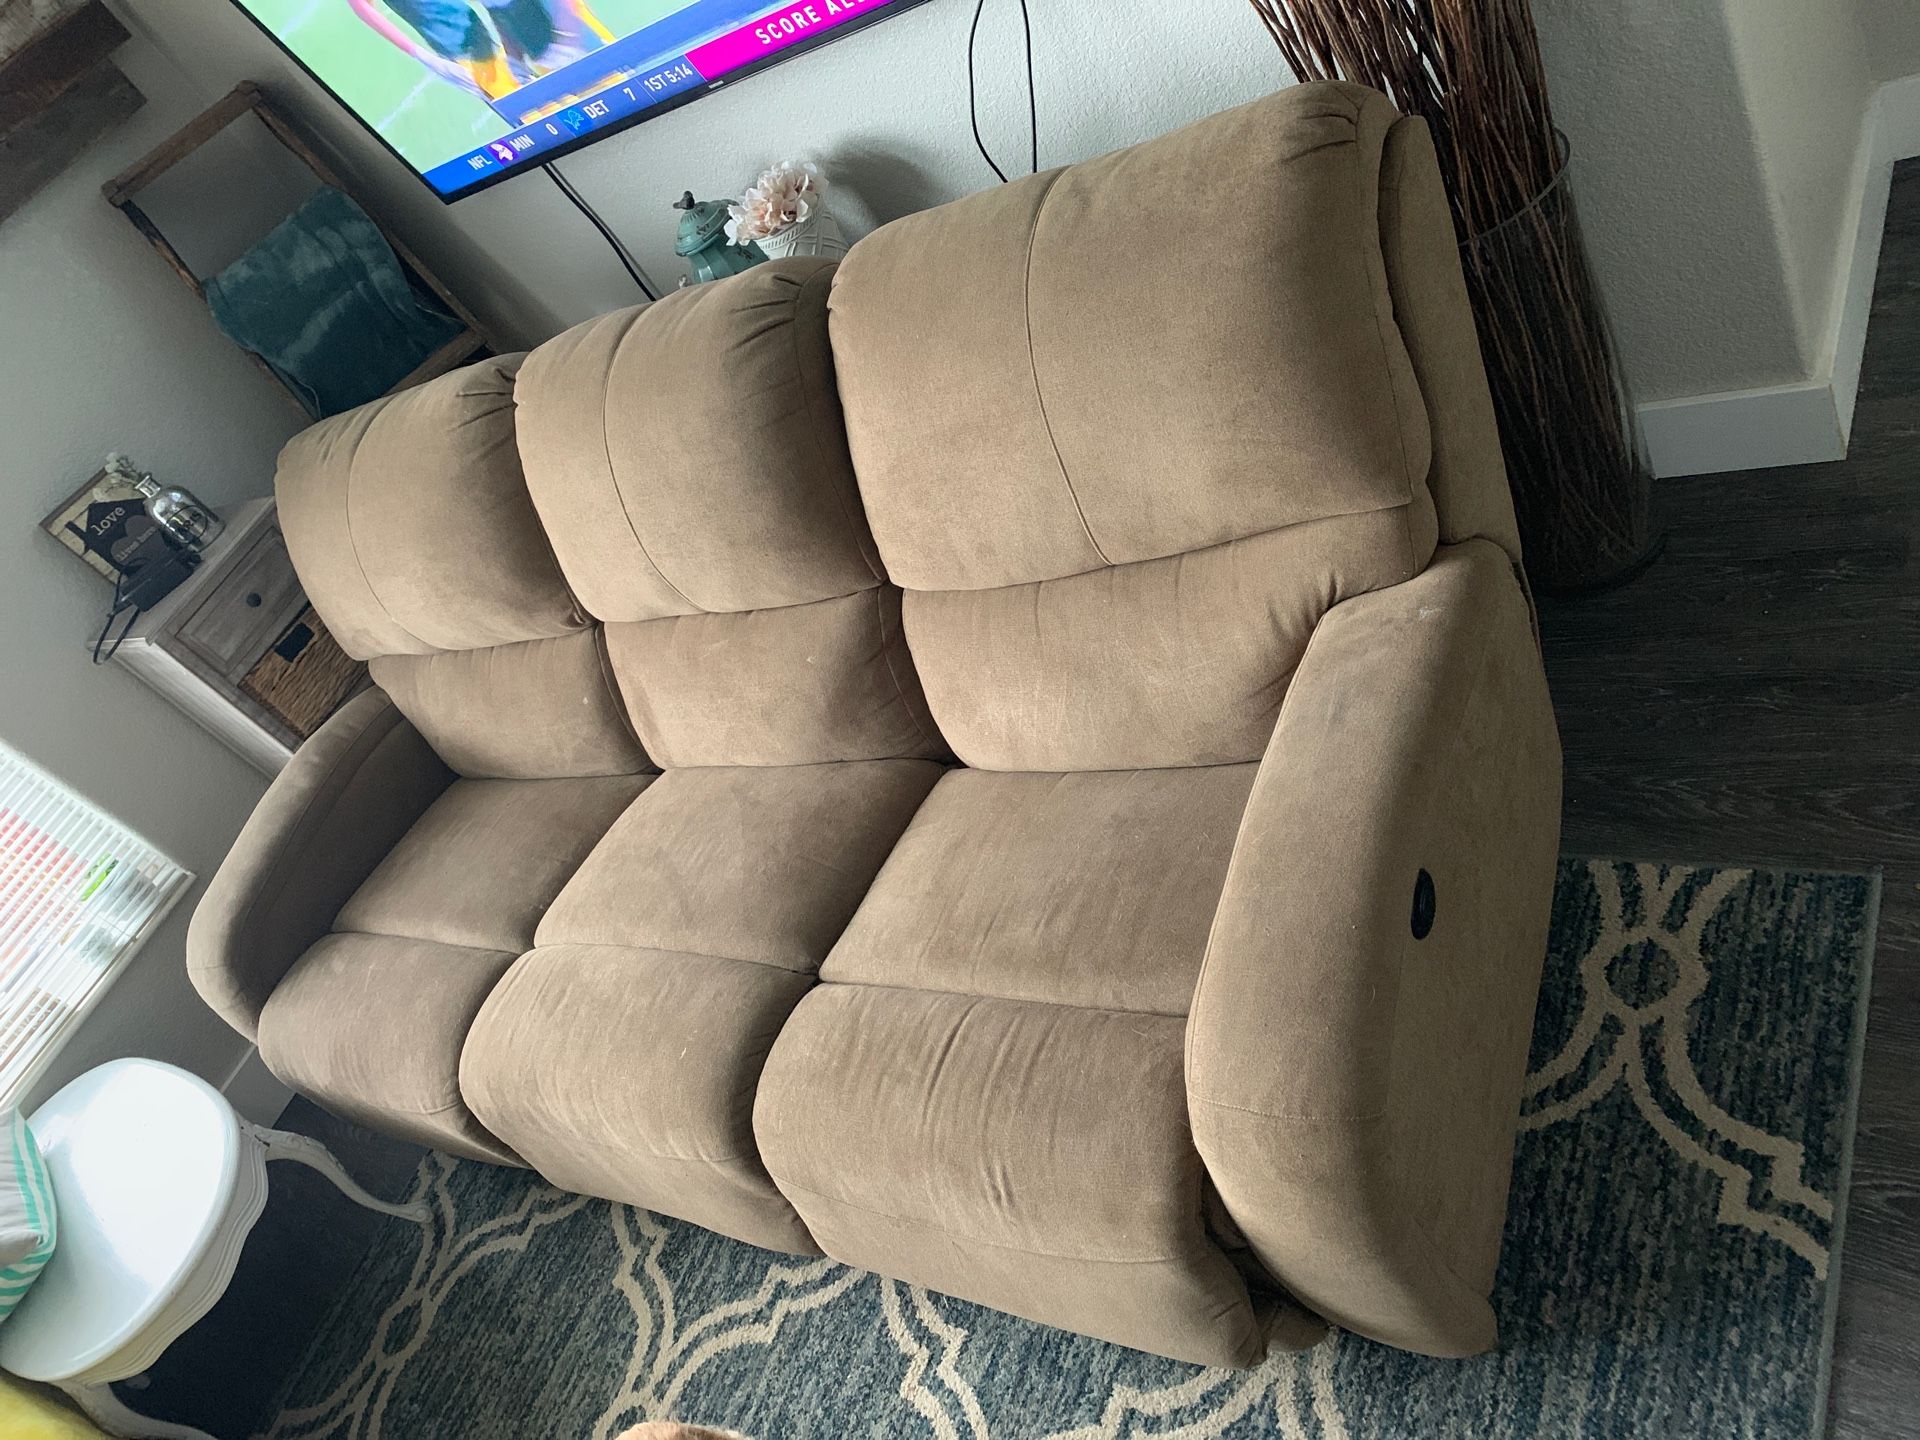 Electric reclining couch